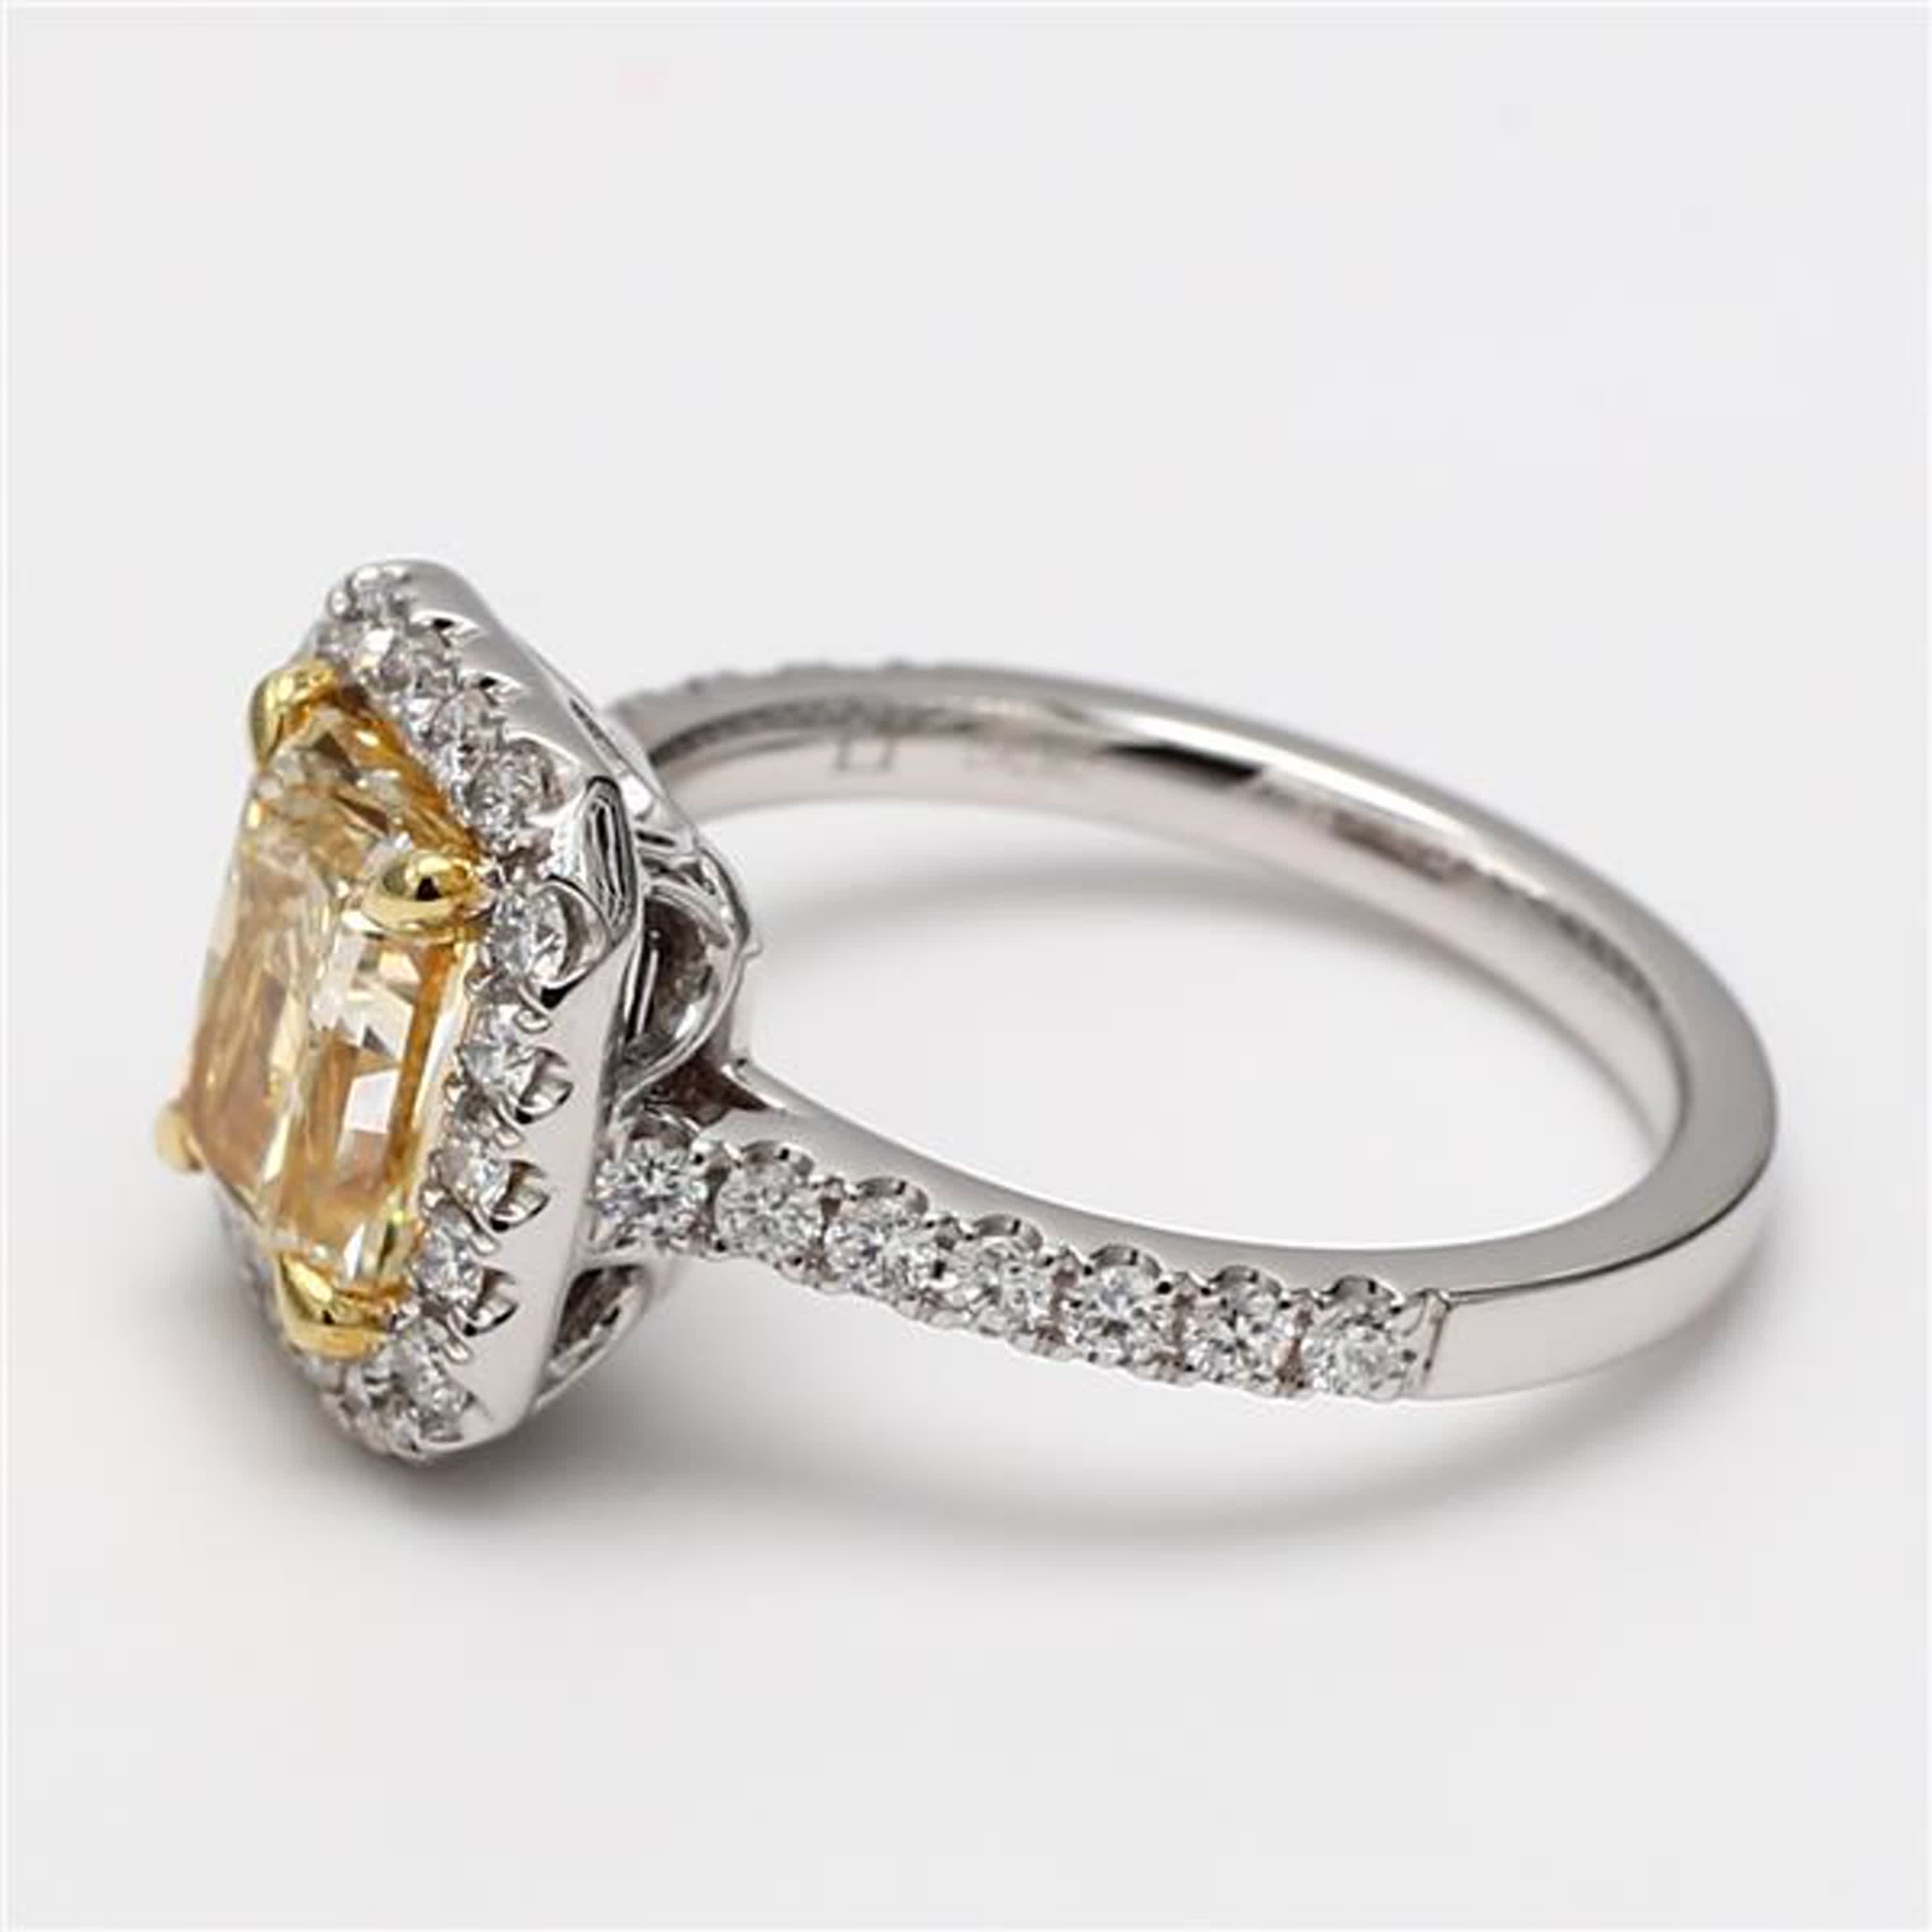 GIA Certified Natural Yellow Radiant and White Diamond 2.96 Carat TW Plat Ring